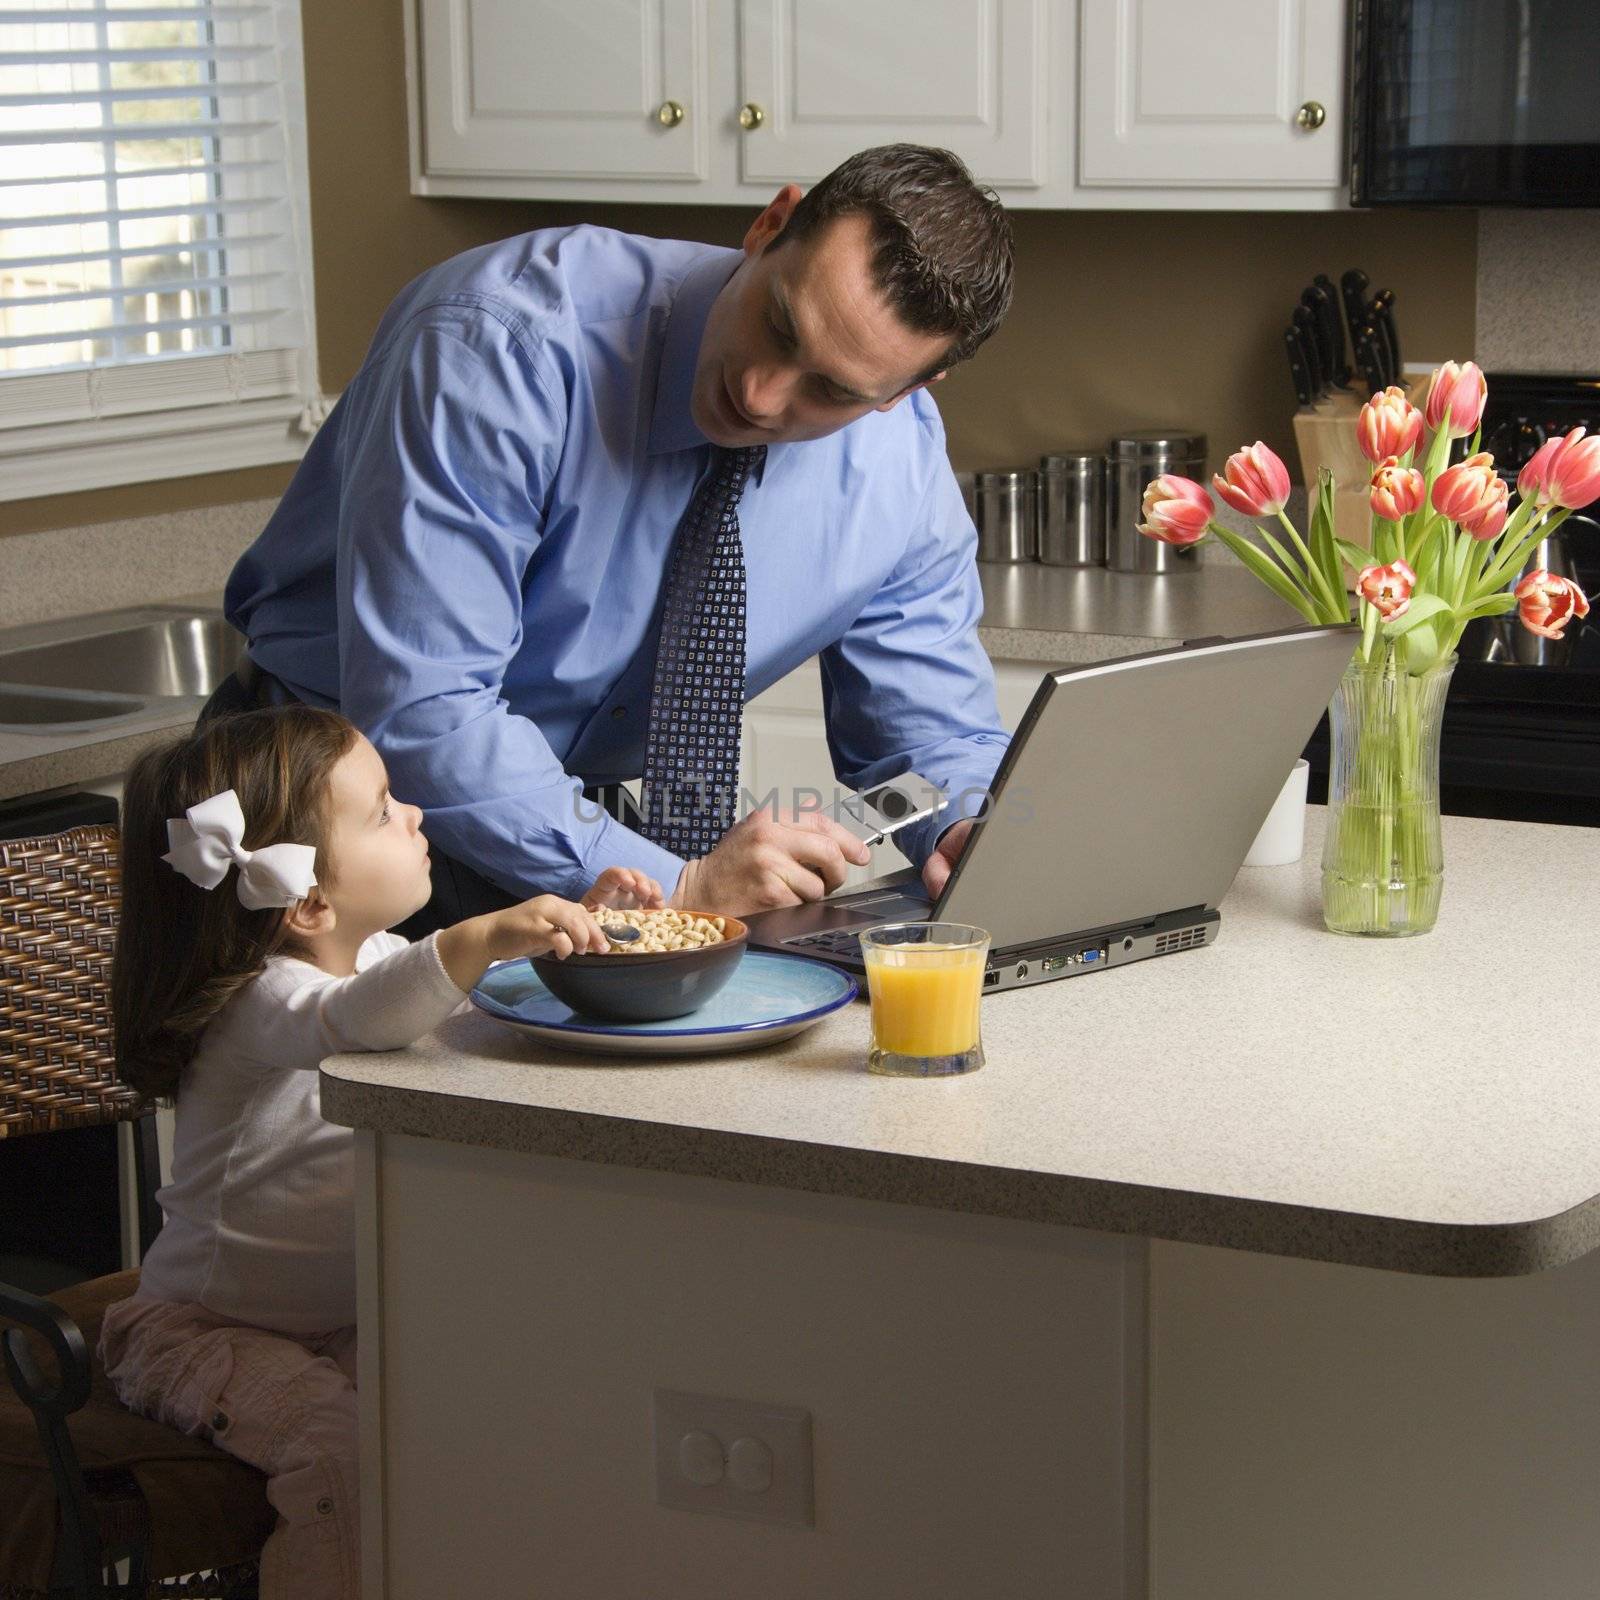 Caucasian father in suit using laptop computer with daughter eating breakfast in kitchen.